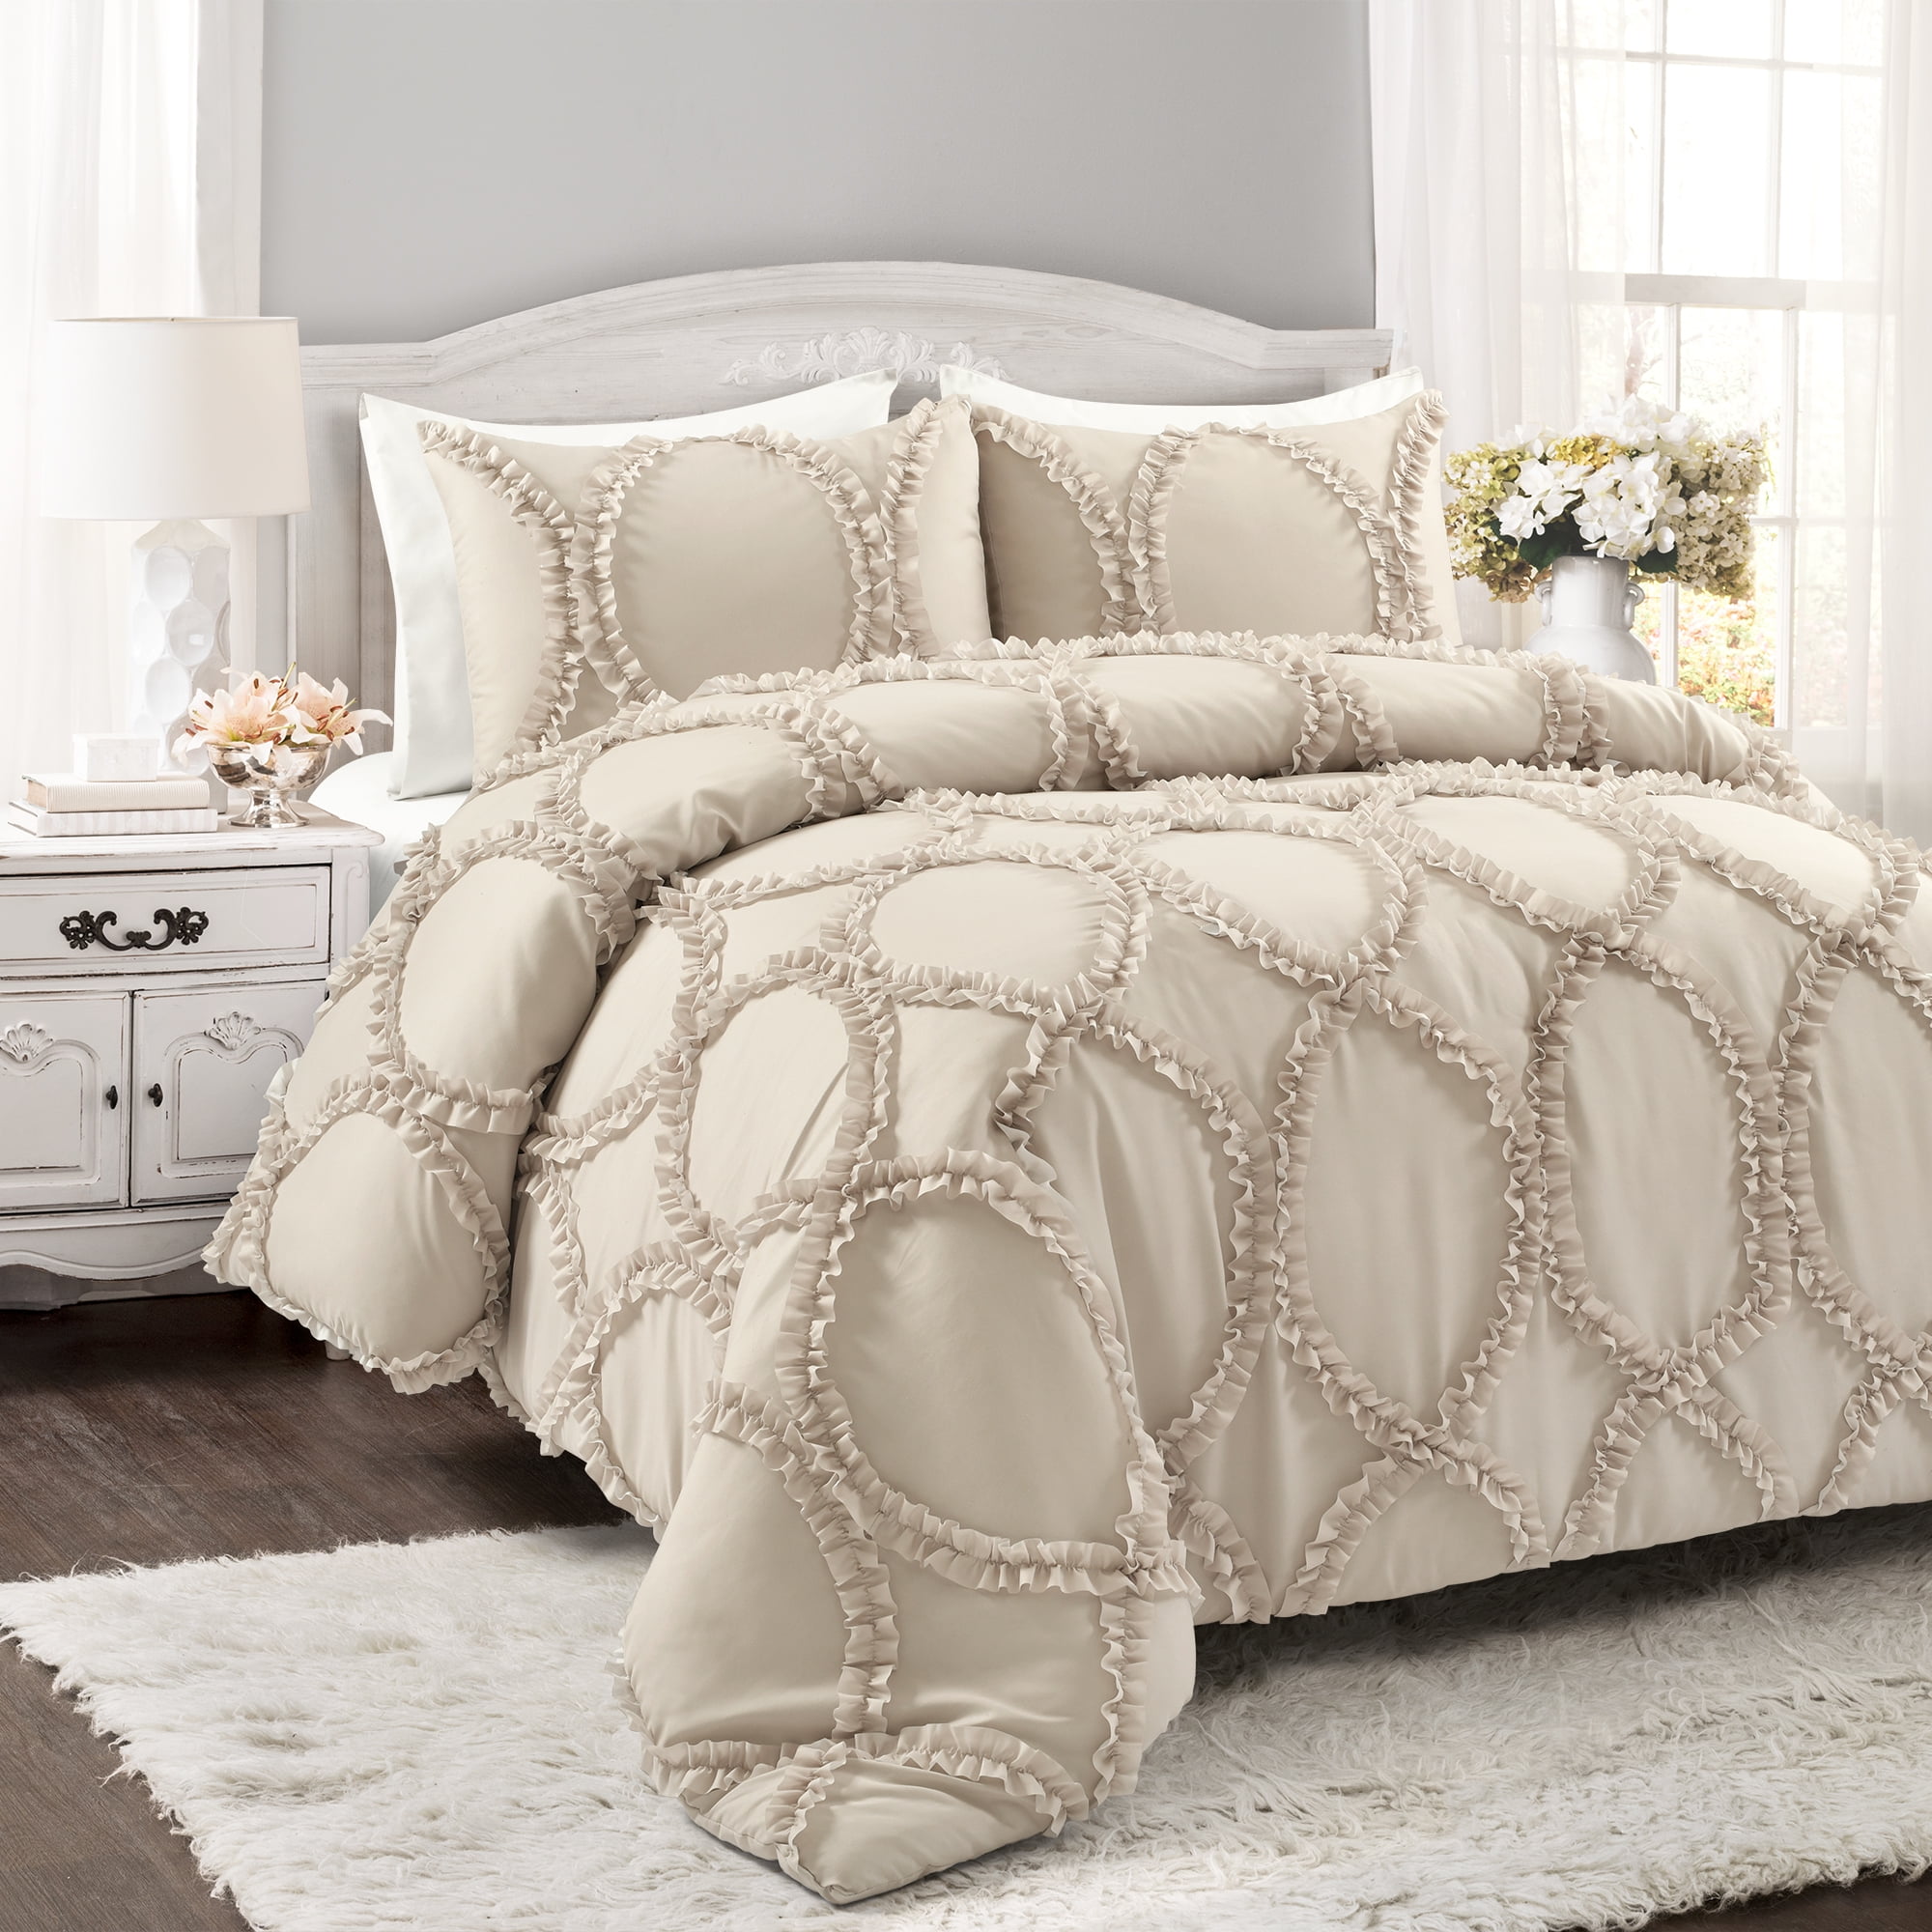 Luxury Cream Gold Ivory Embroidered Quilted Bedspread Throw Neutral Elegant 